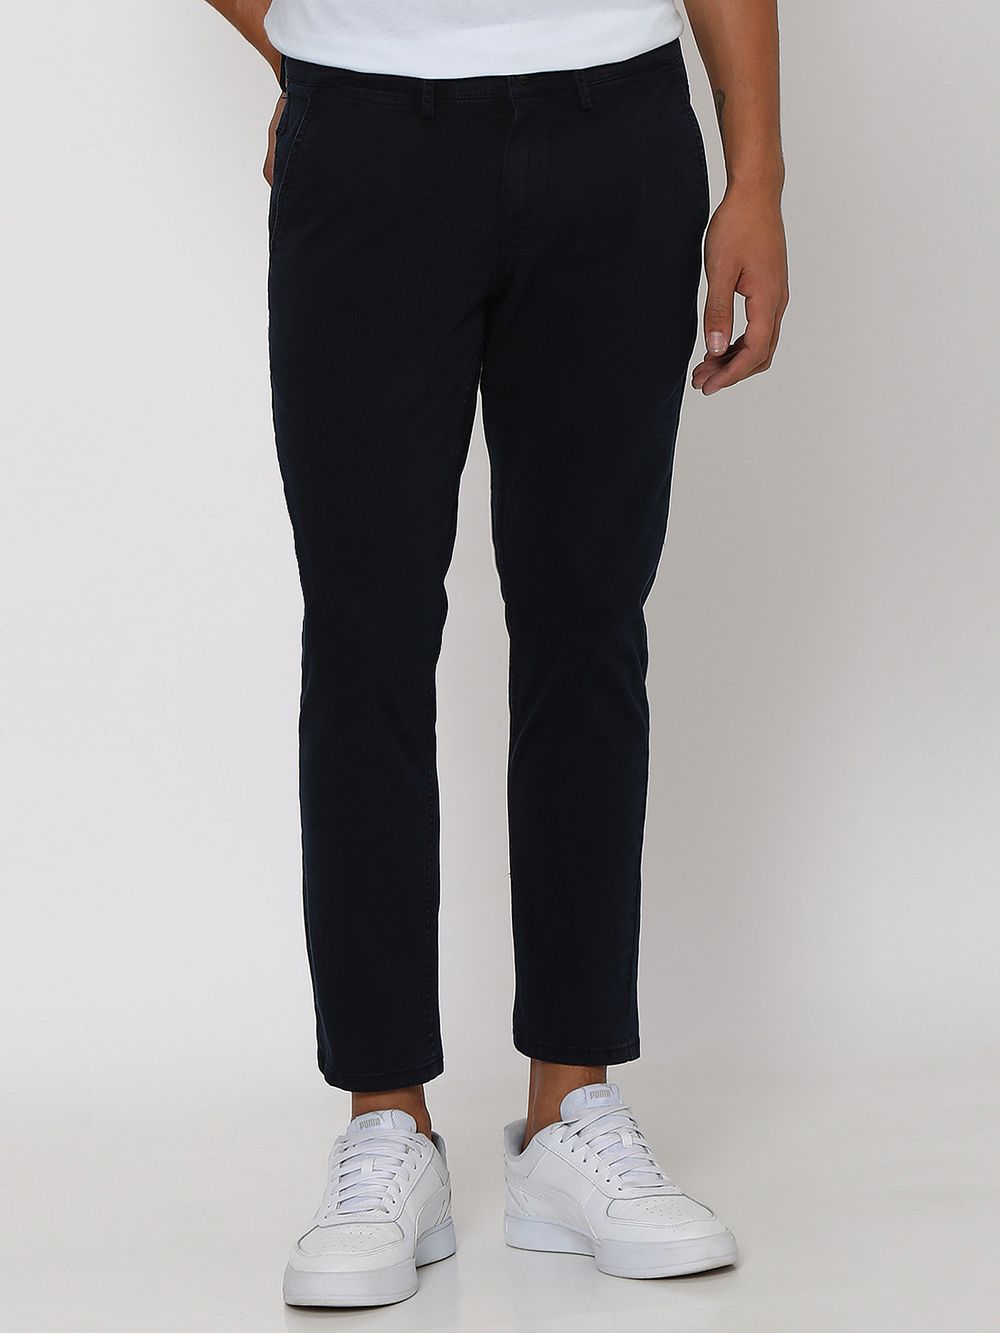 Navy Ankle Length Stretch Chinos